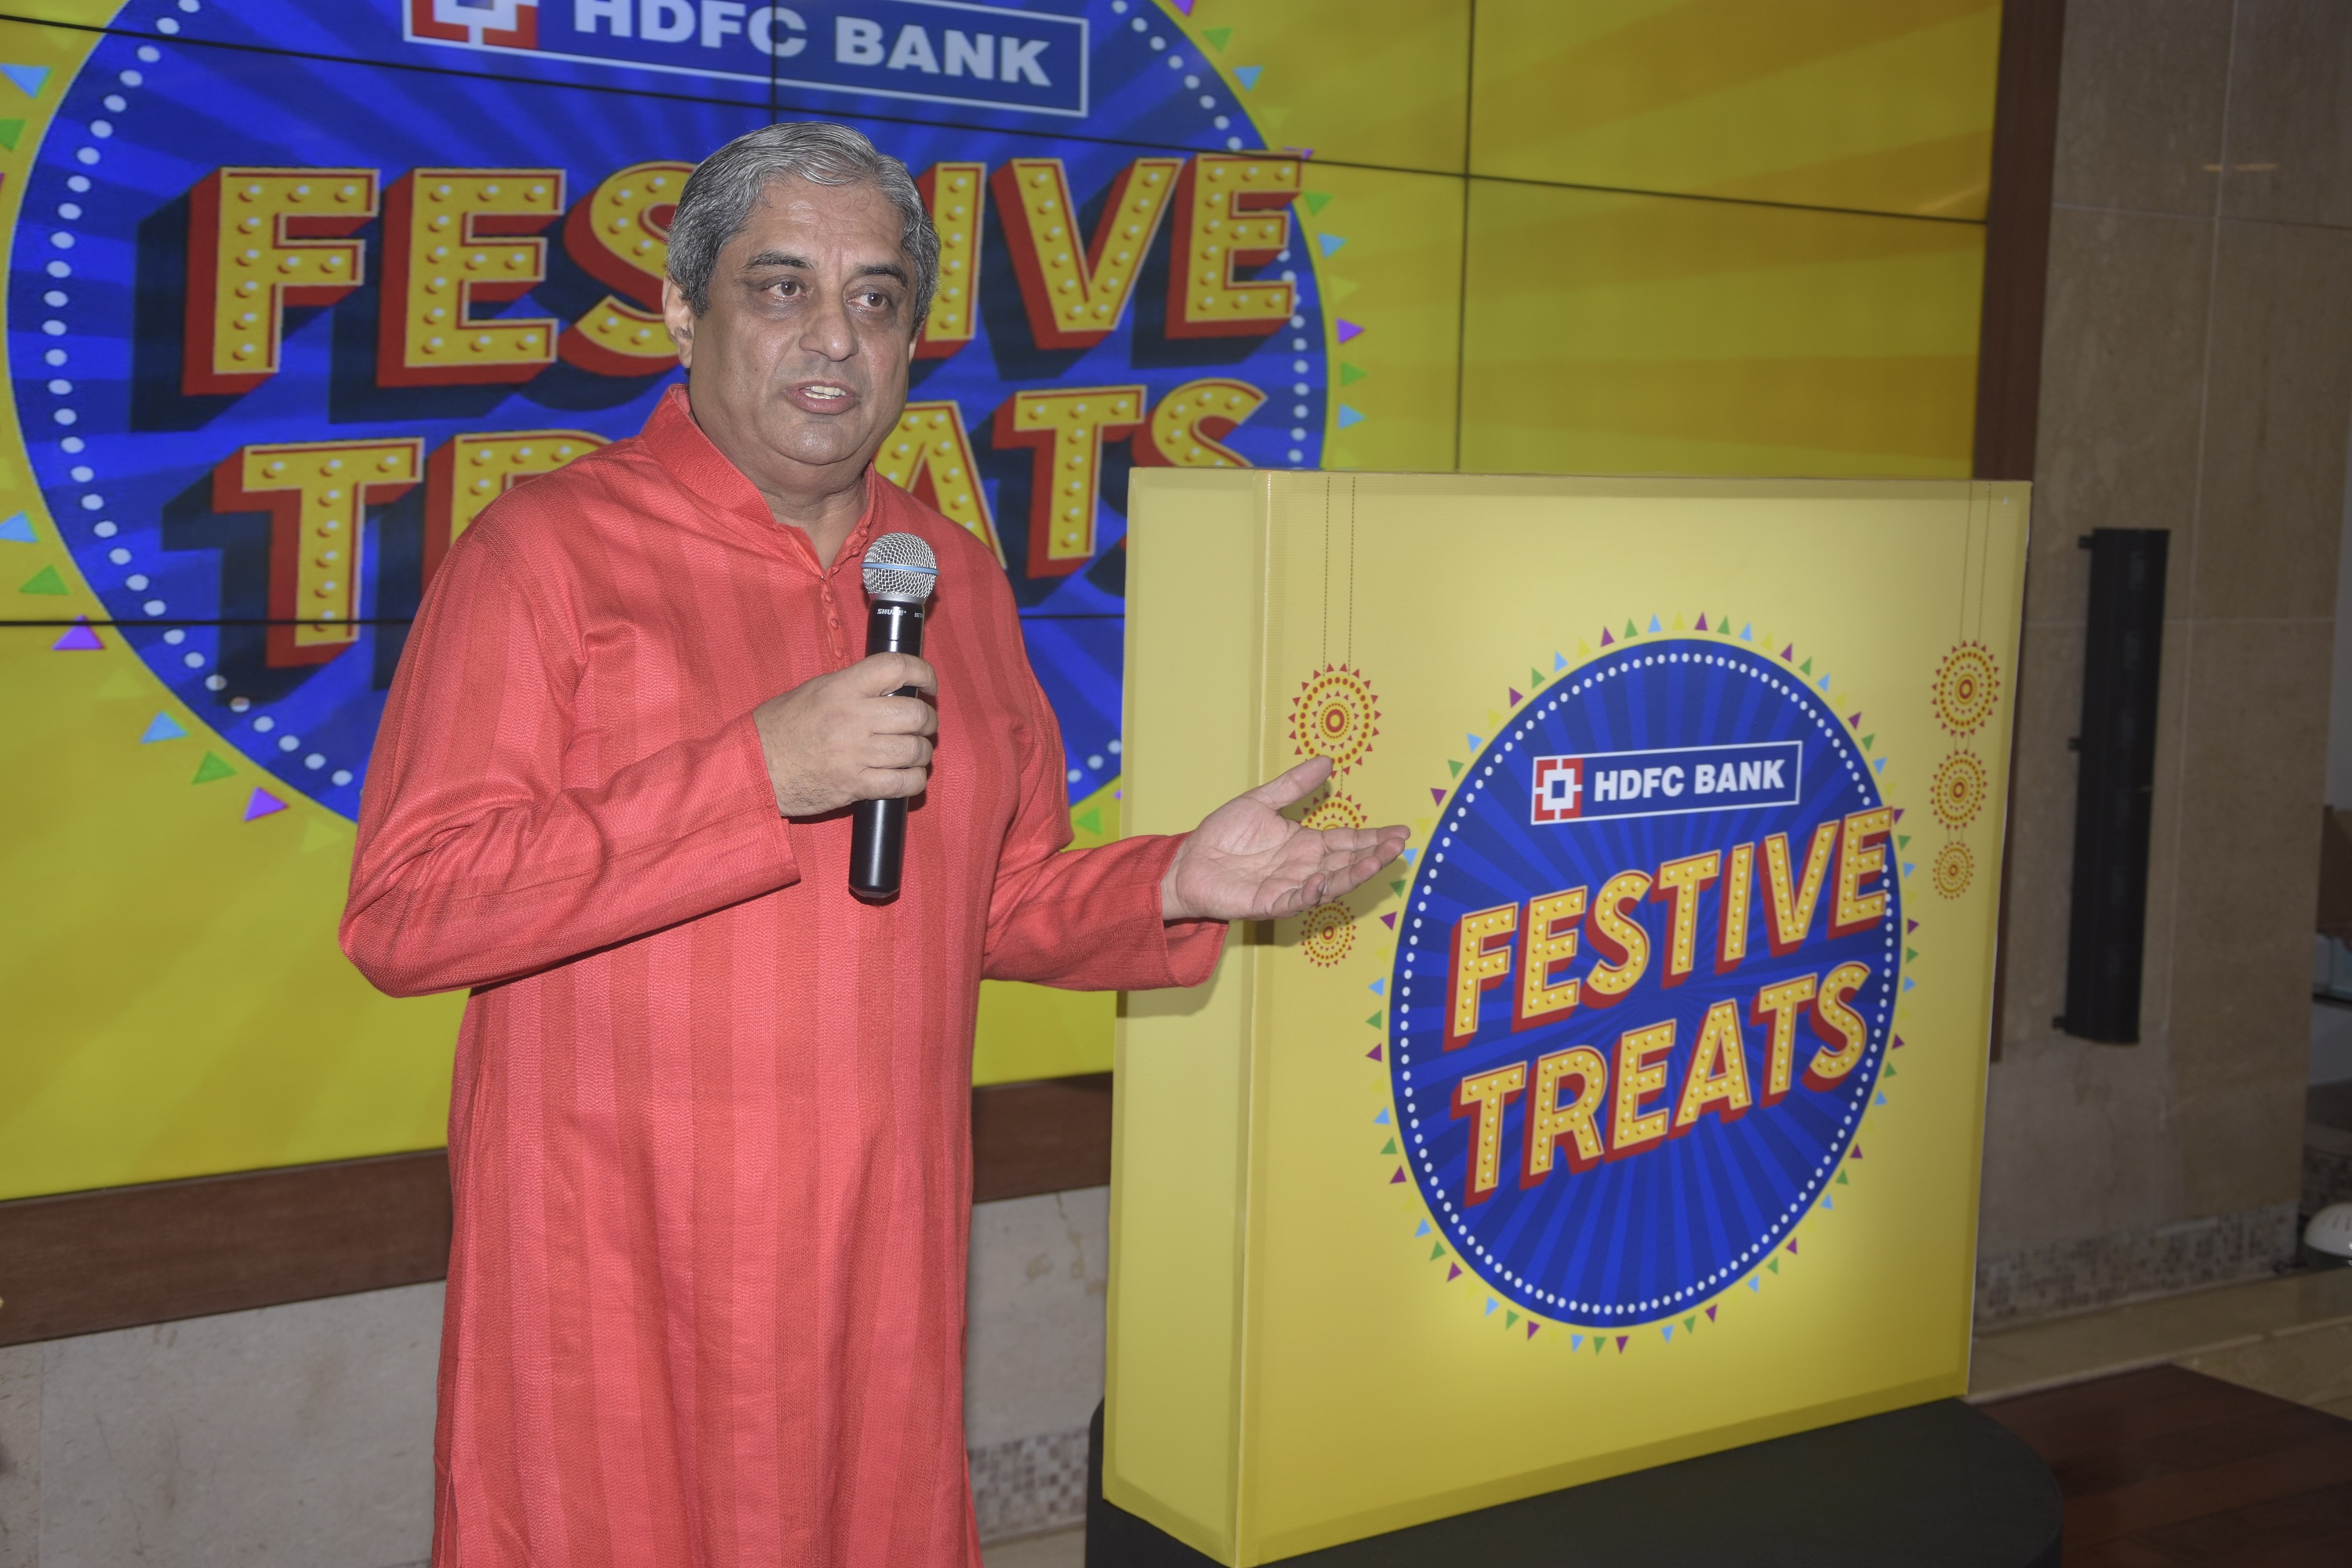 At a function organised in Mumbai, ‘Festive Treats’ - India’s largest financial services dhamaka was launched by Mr. Aditya Puri, Managing Director, HDFC Bank -Photo By Sachin Murdeshwar GPN